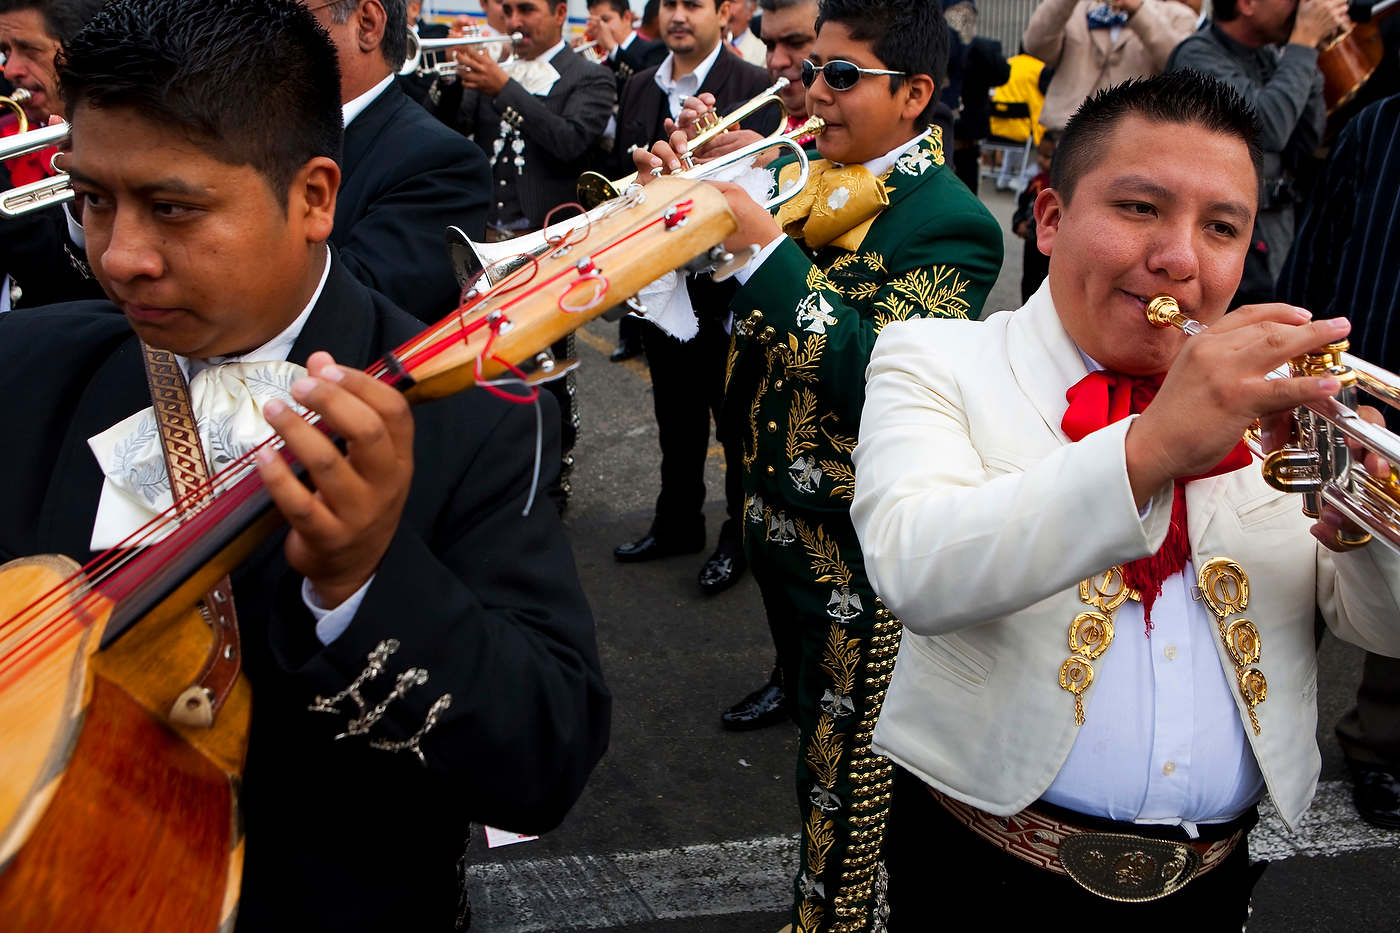 Mariachis_New14_002